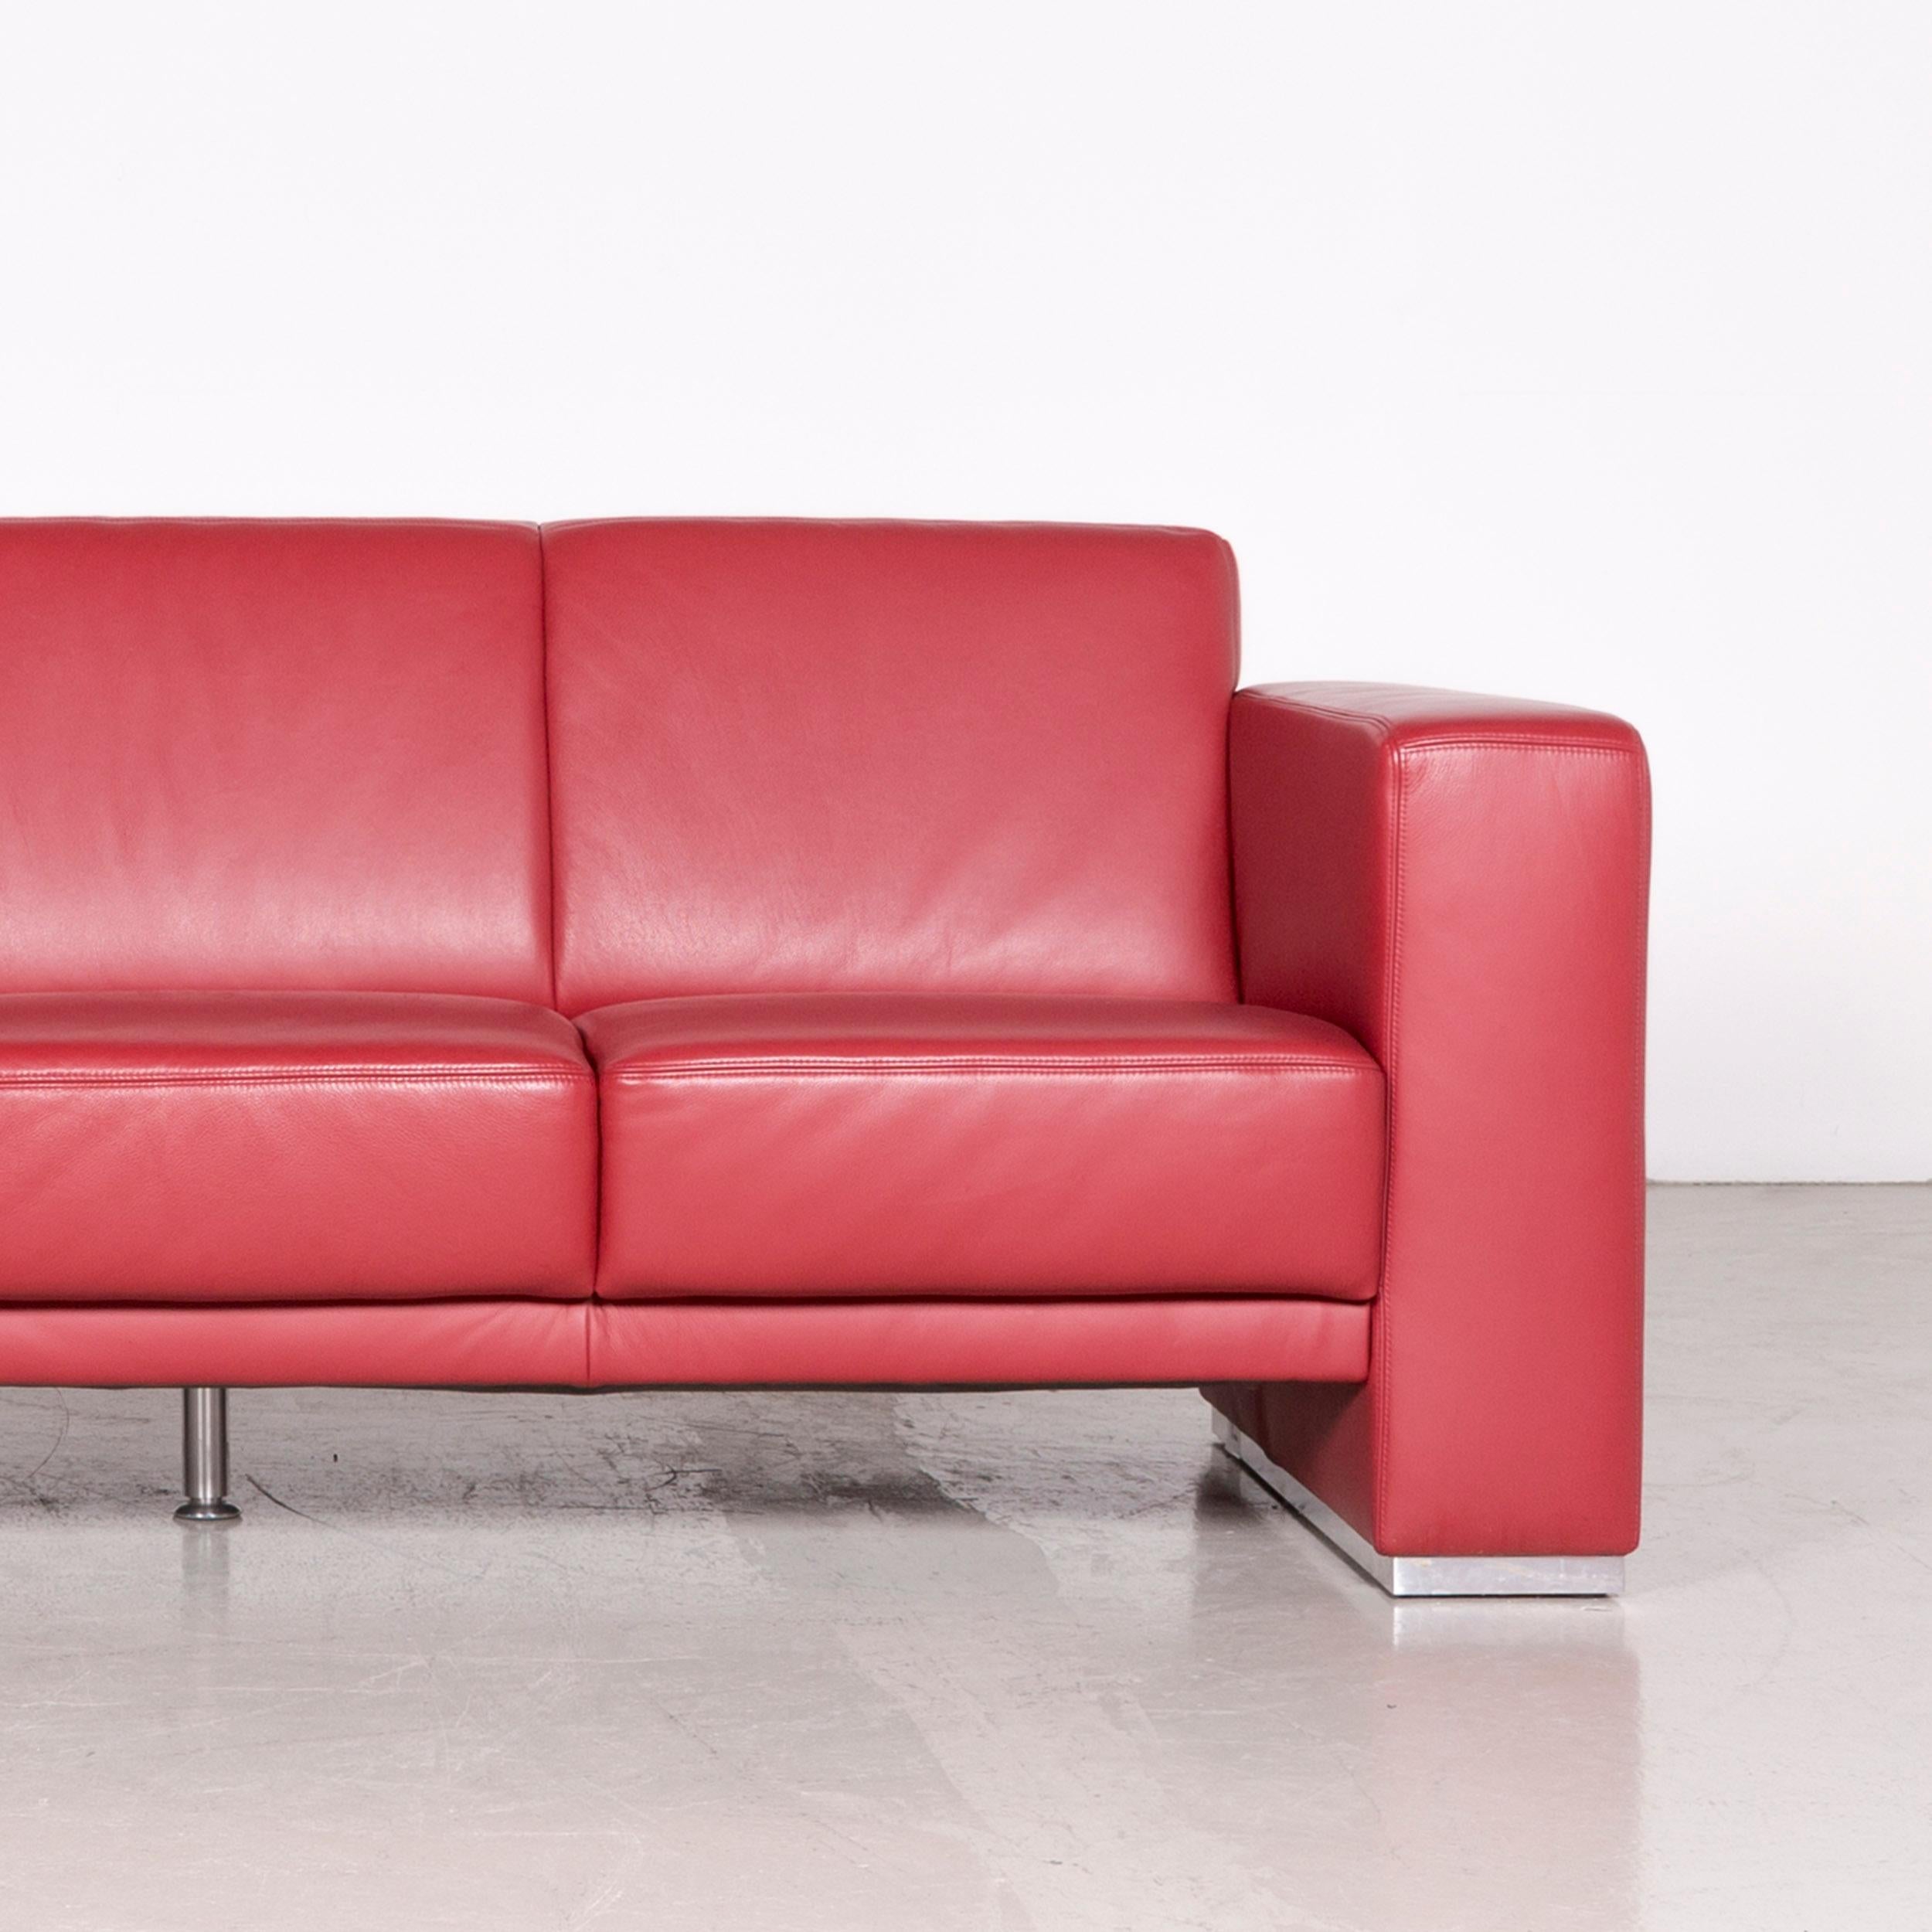 German Koinor Nove Designer Leather Sofa Red Two-Seat Couch